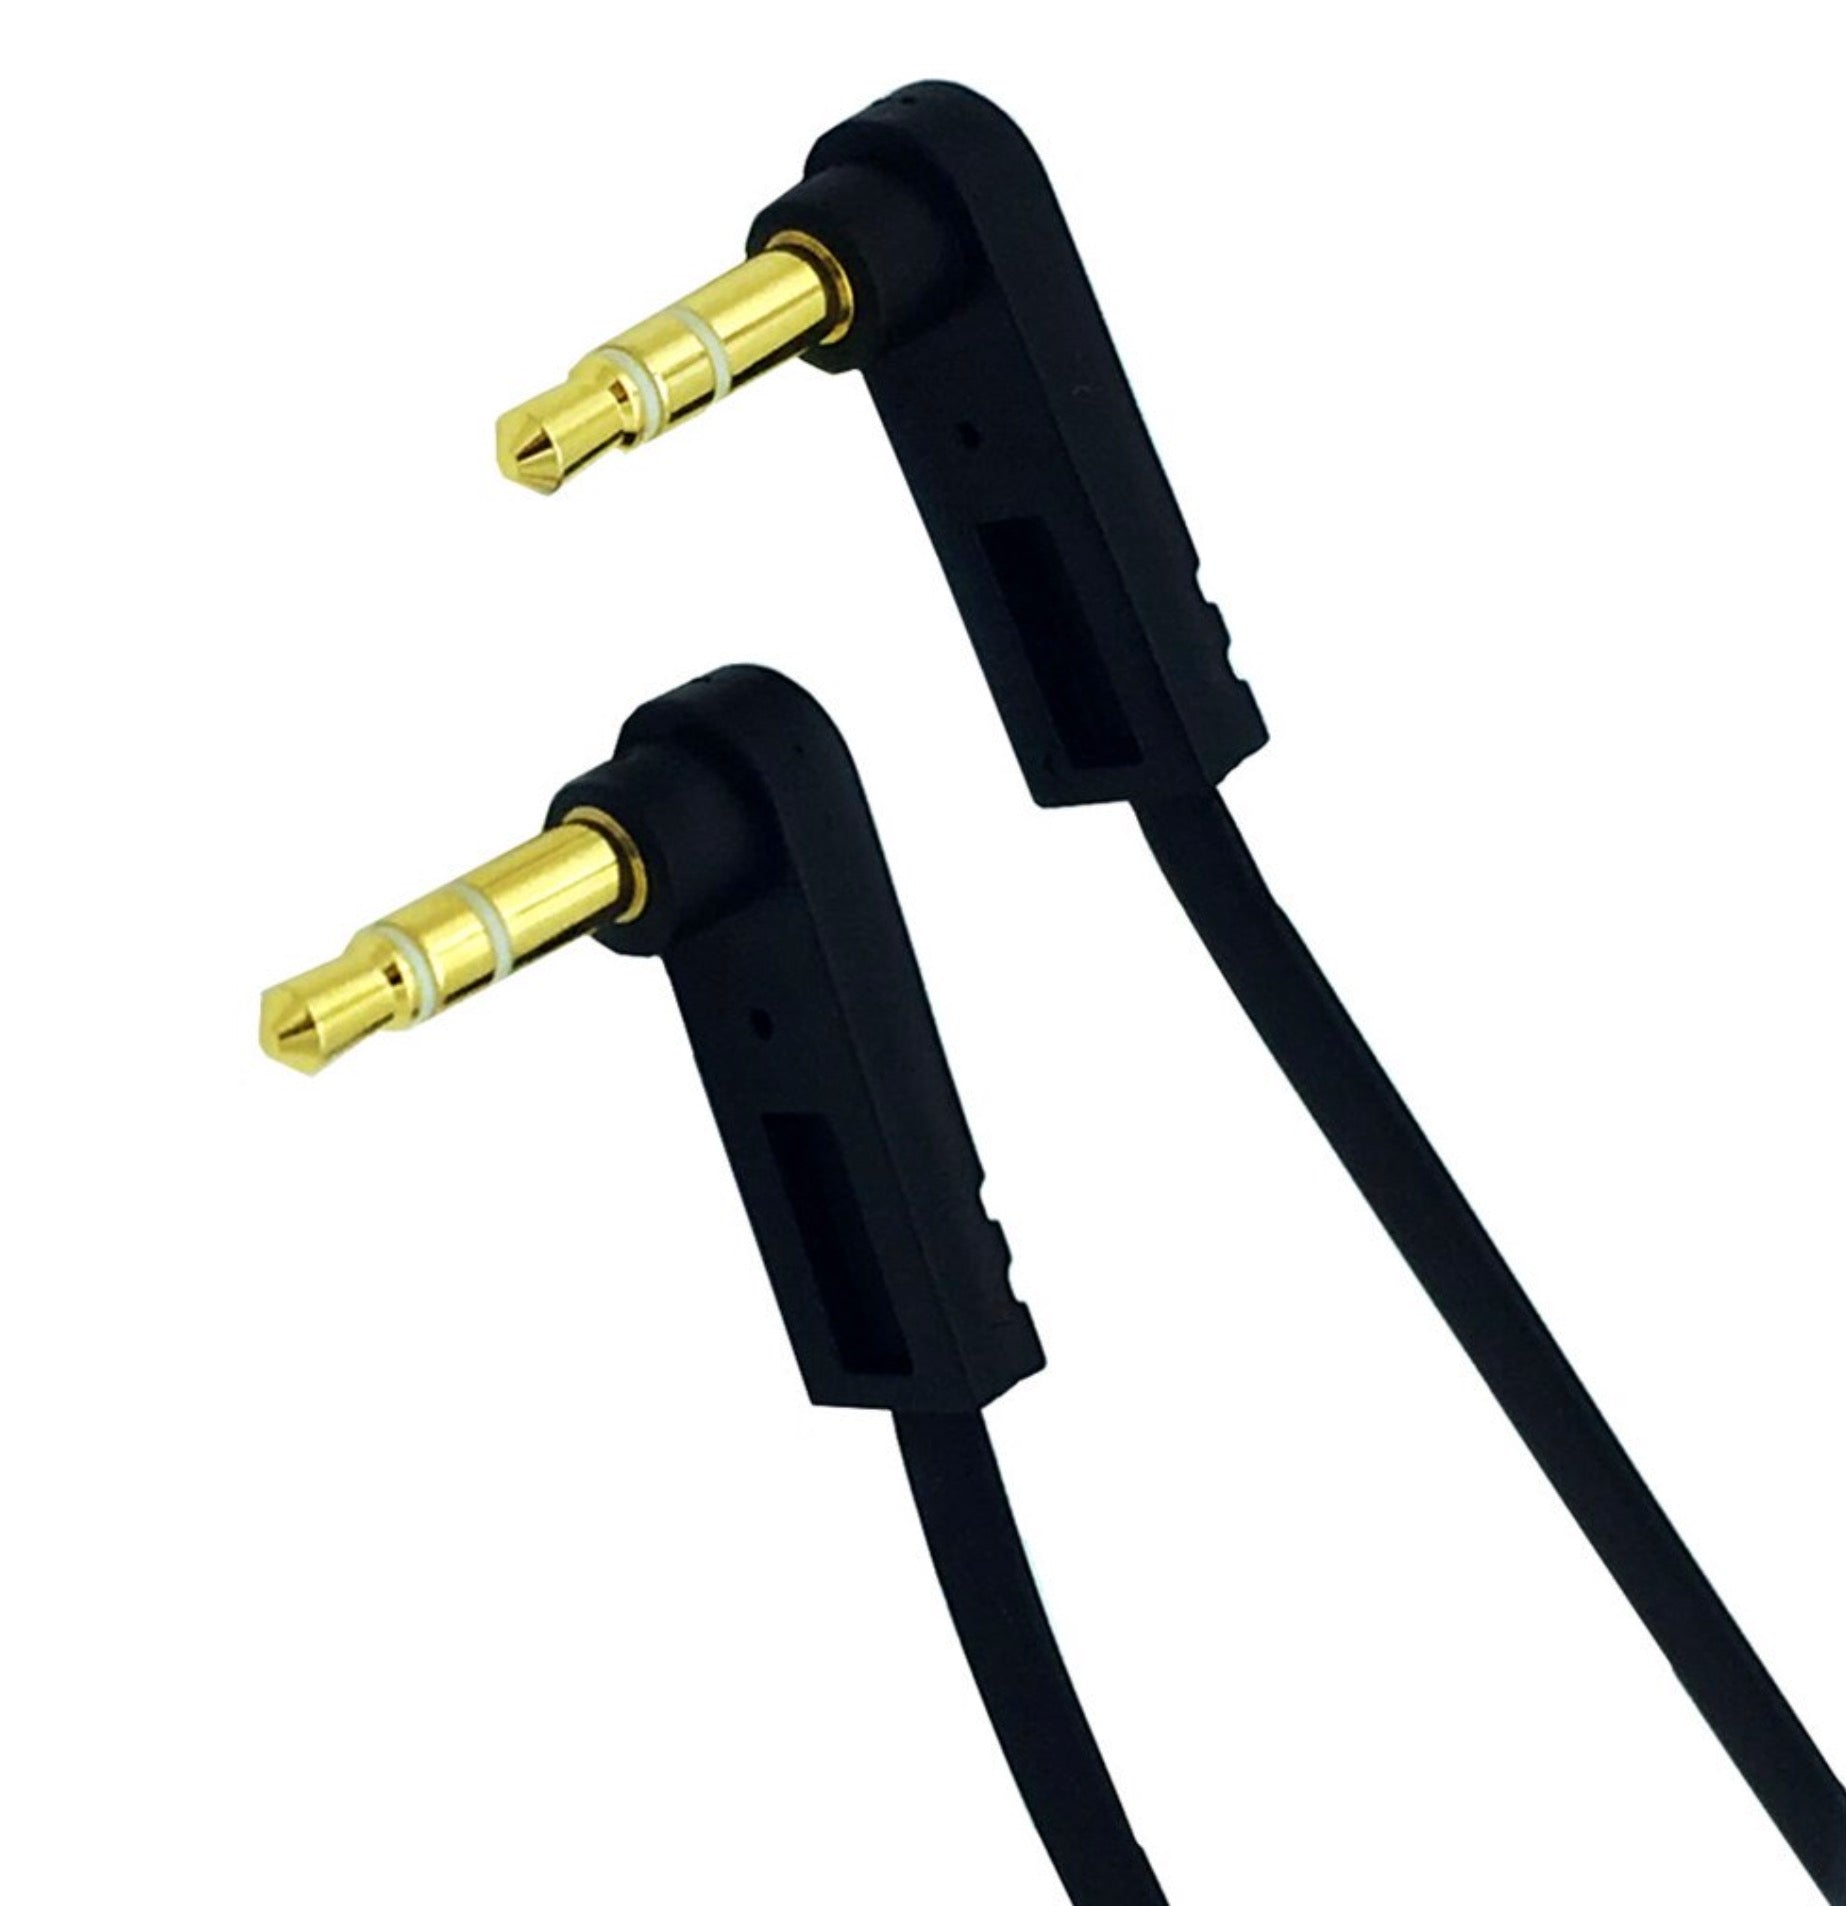 3.5mm 1/8" TRS Male to TRS Male Stereo Jack Audio Flat Cable